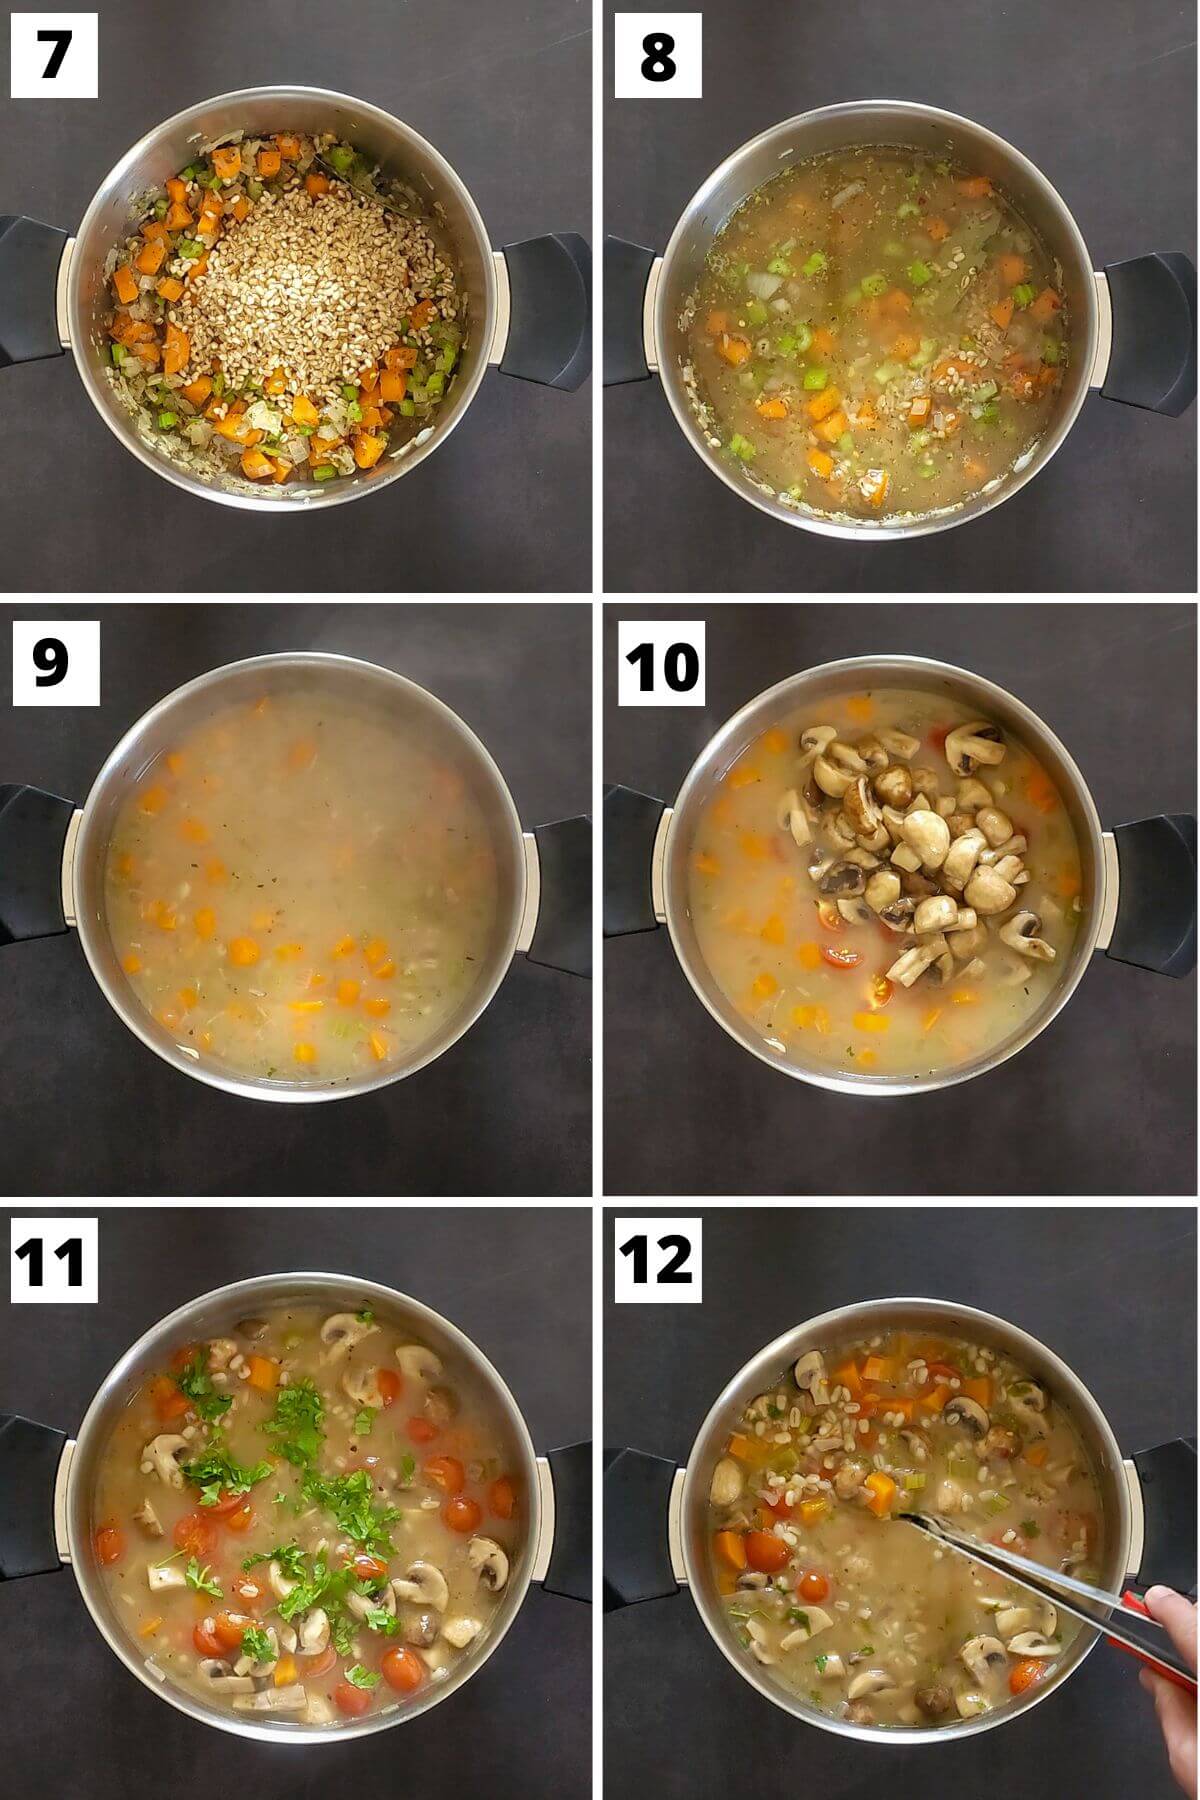 Collage of steps 7 to 12 of mushroom and barley soup.